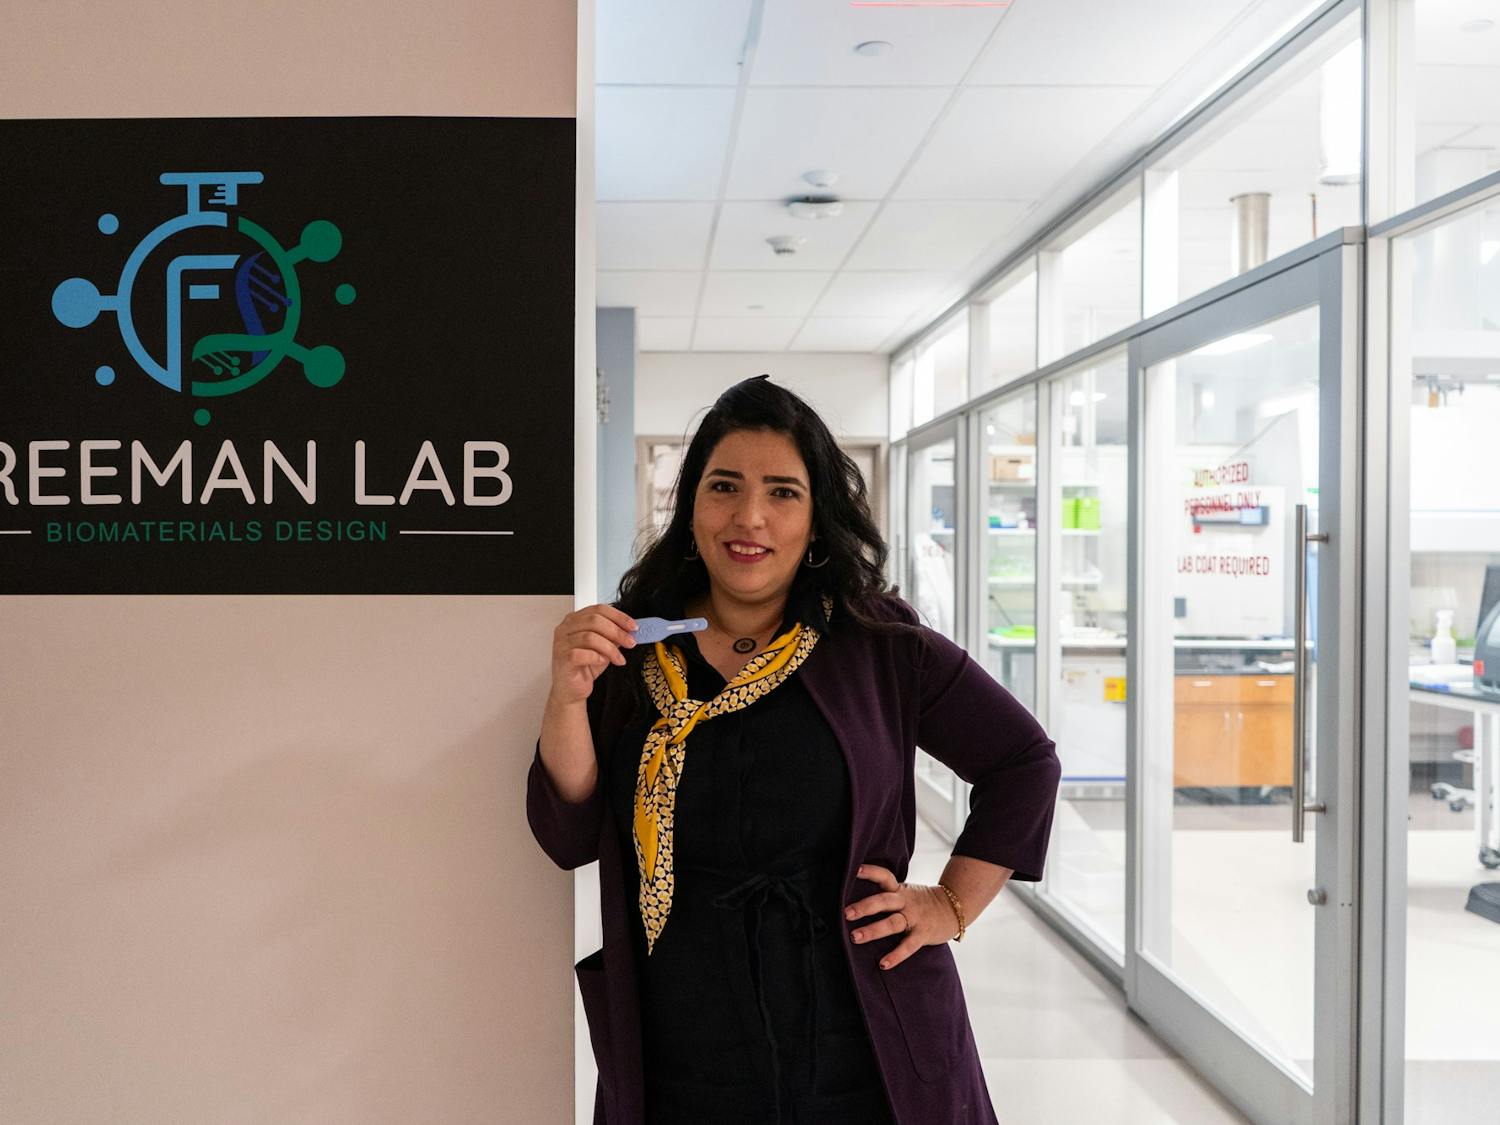 Dr. Ronit Freeman poses for a portrait with the new GlycoGrip COVID-19 testing strip at the Freeman Lab on Monday, Jan. 10, 2022. The GlycoGrip features a sugar-coated exterior that mimics the structure of a cell, making it possible for the virus to be detected.